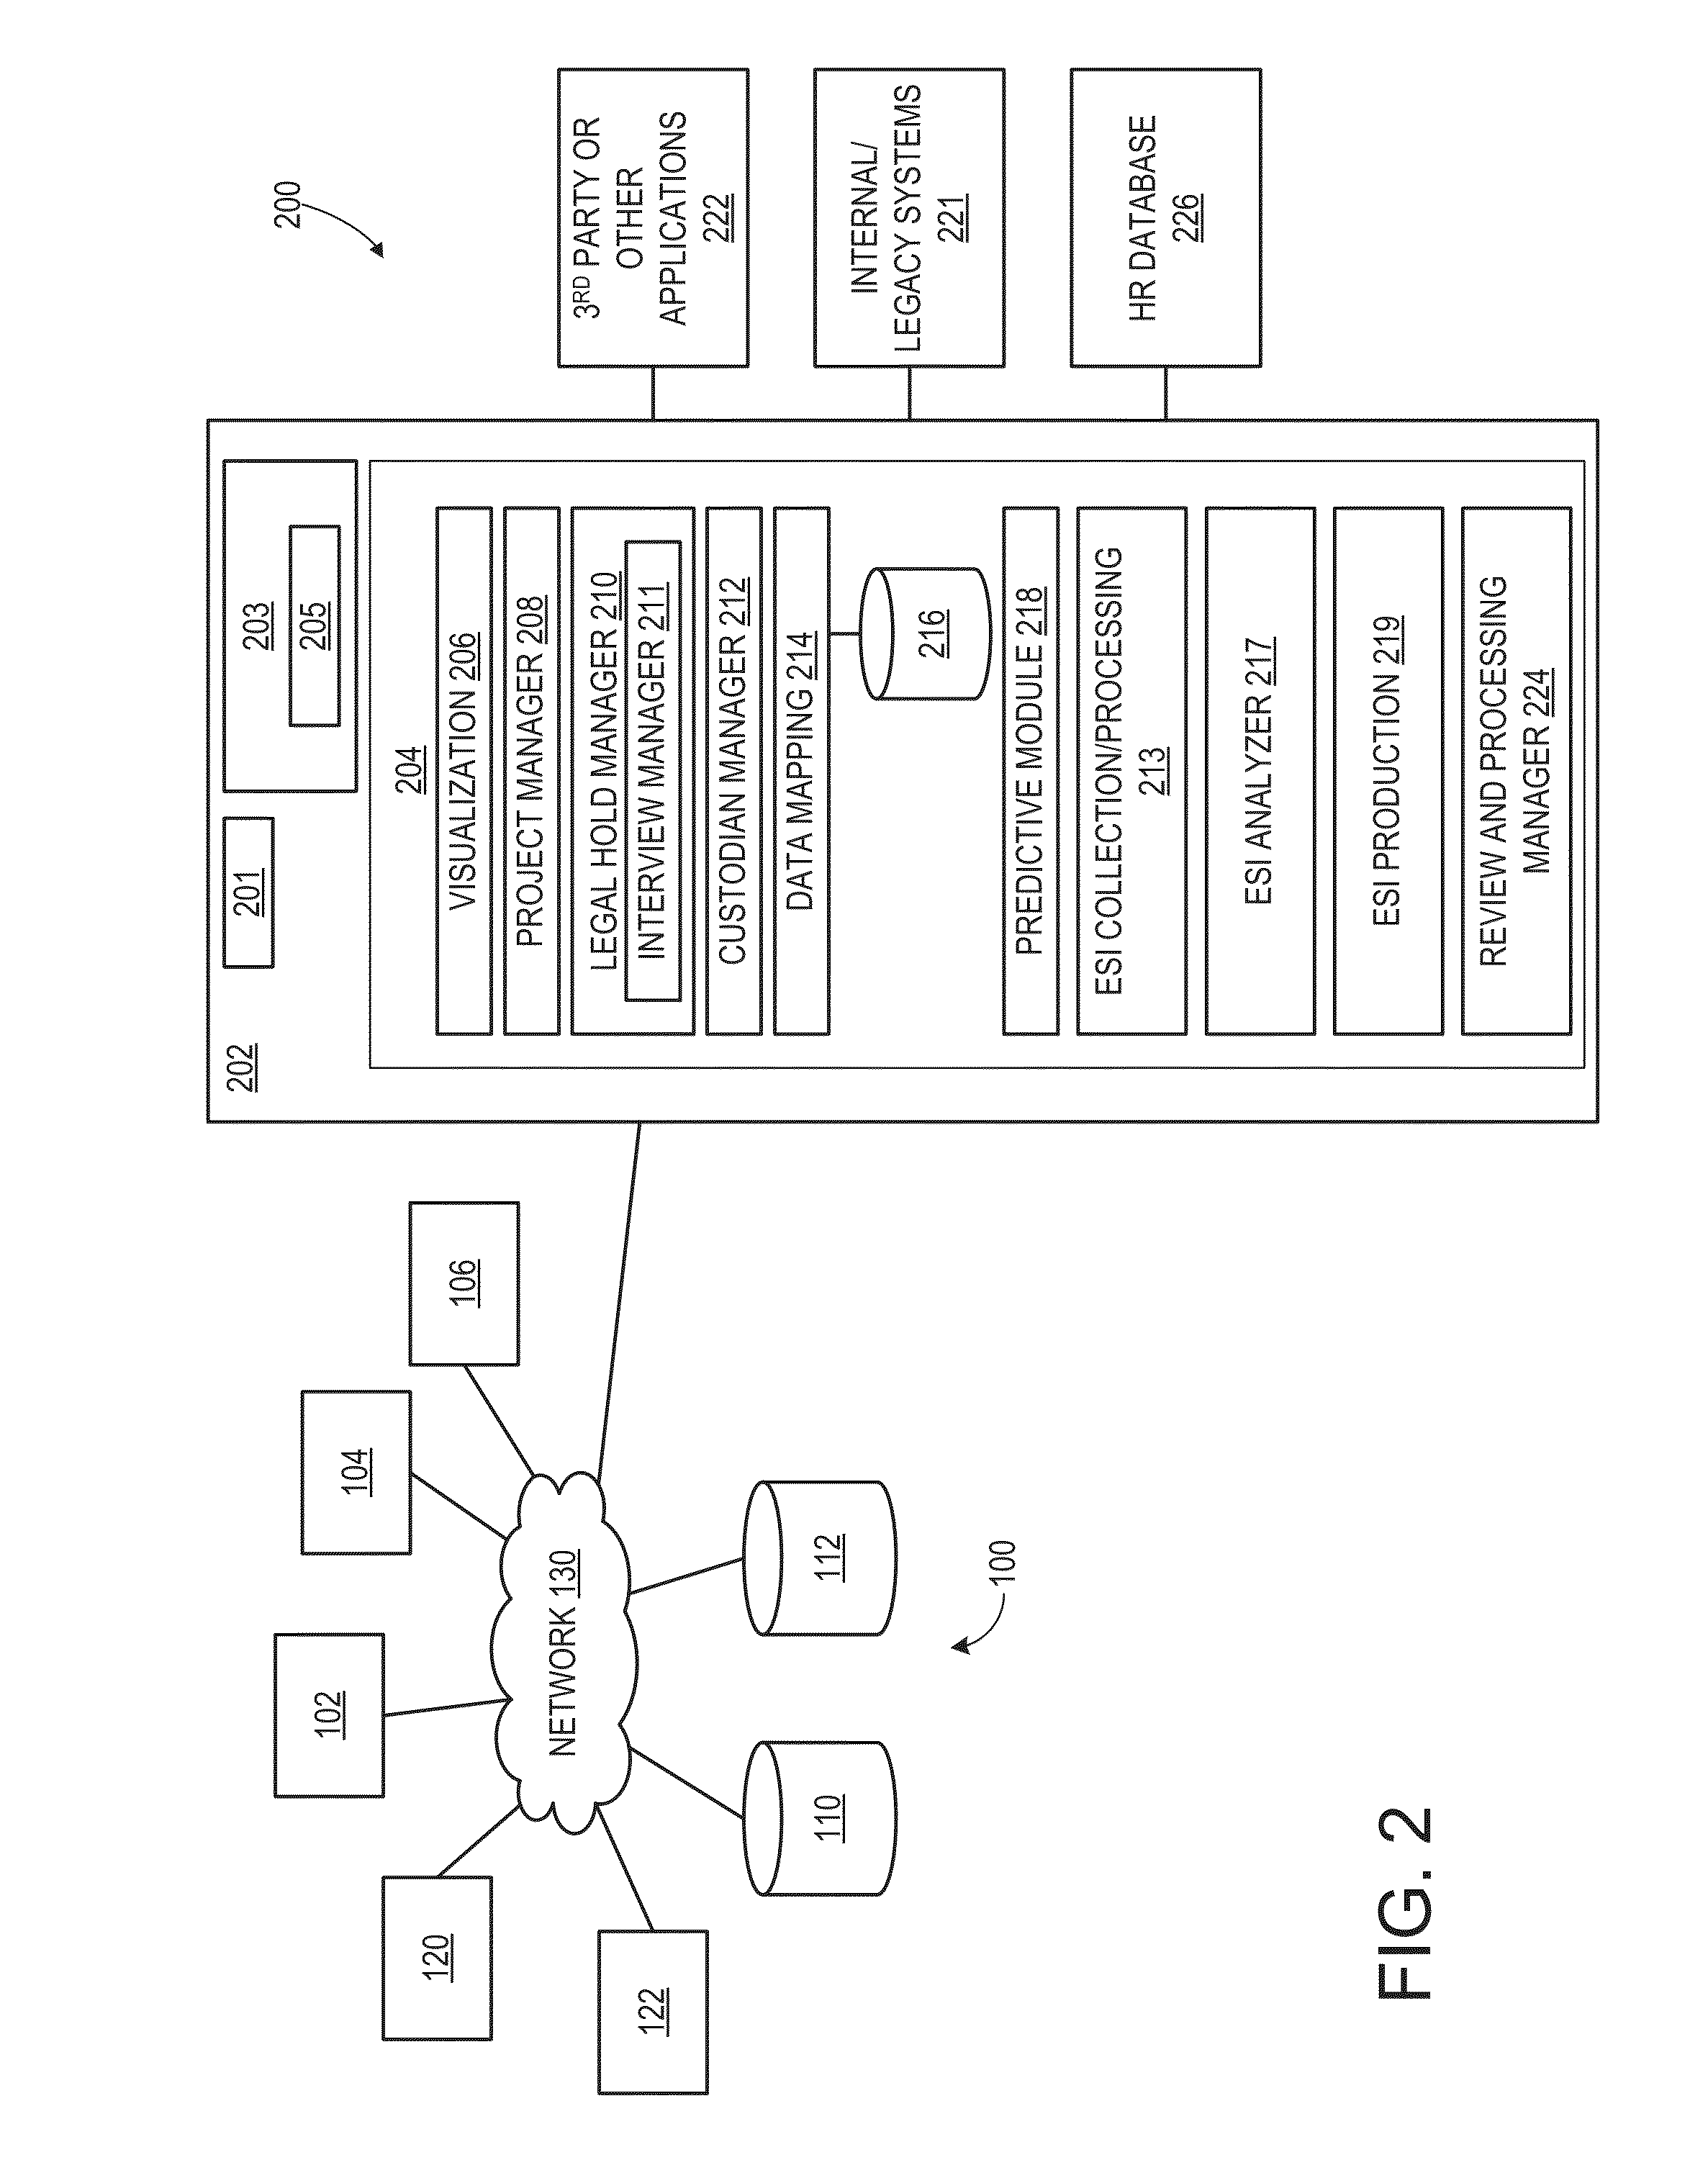 Electronic discovery systems and workflow management method